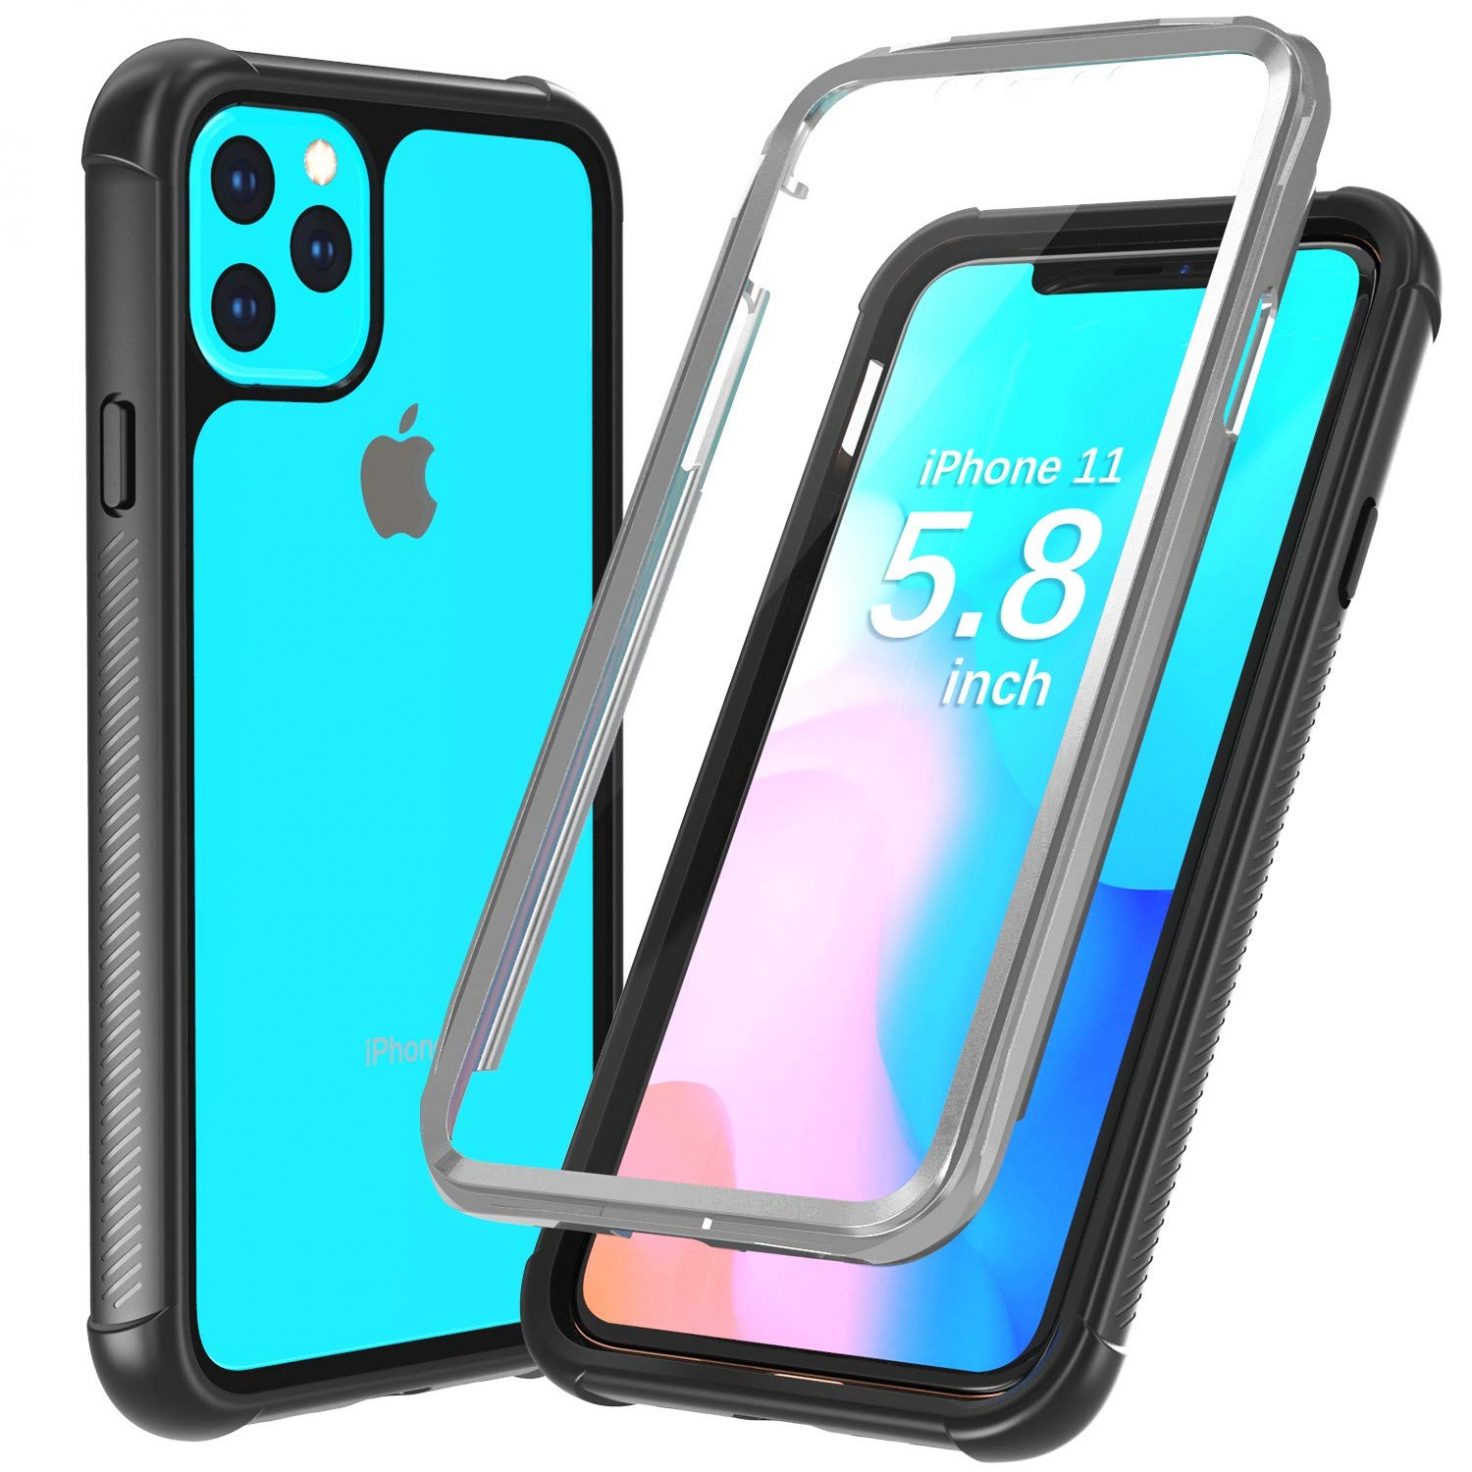 Justcool iPhone 11 Pro rugged case